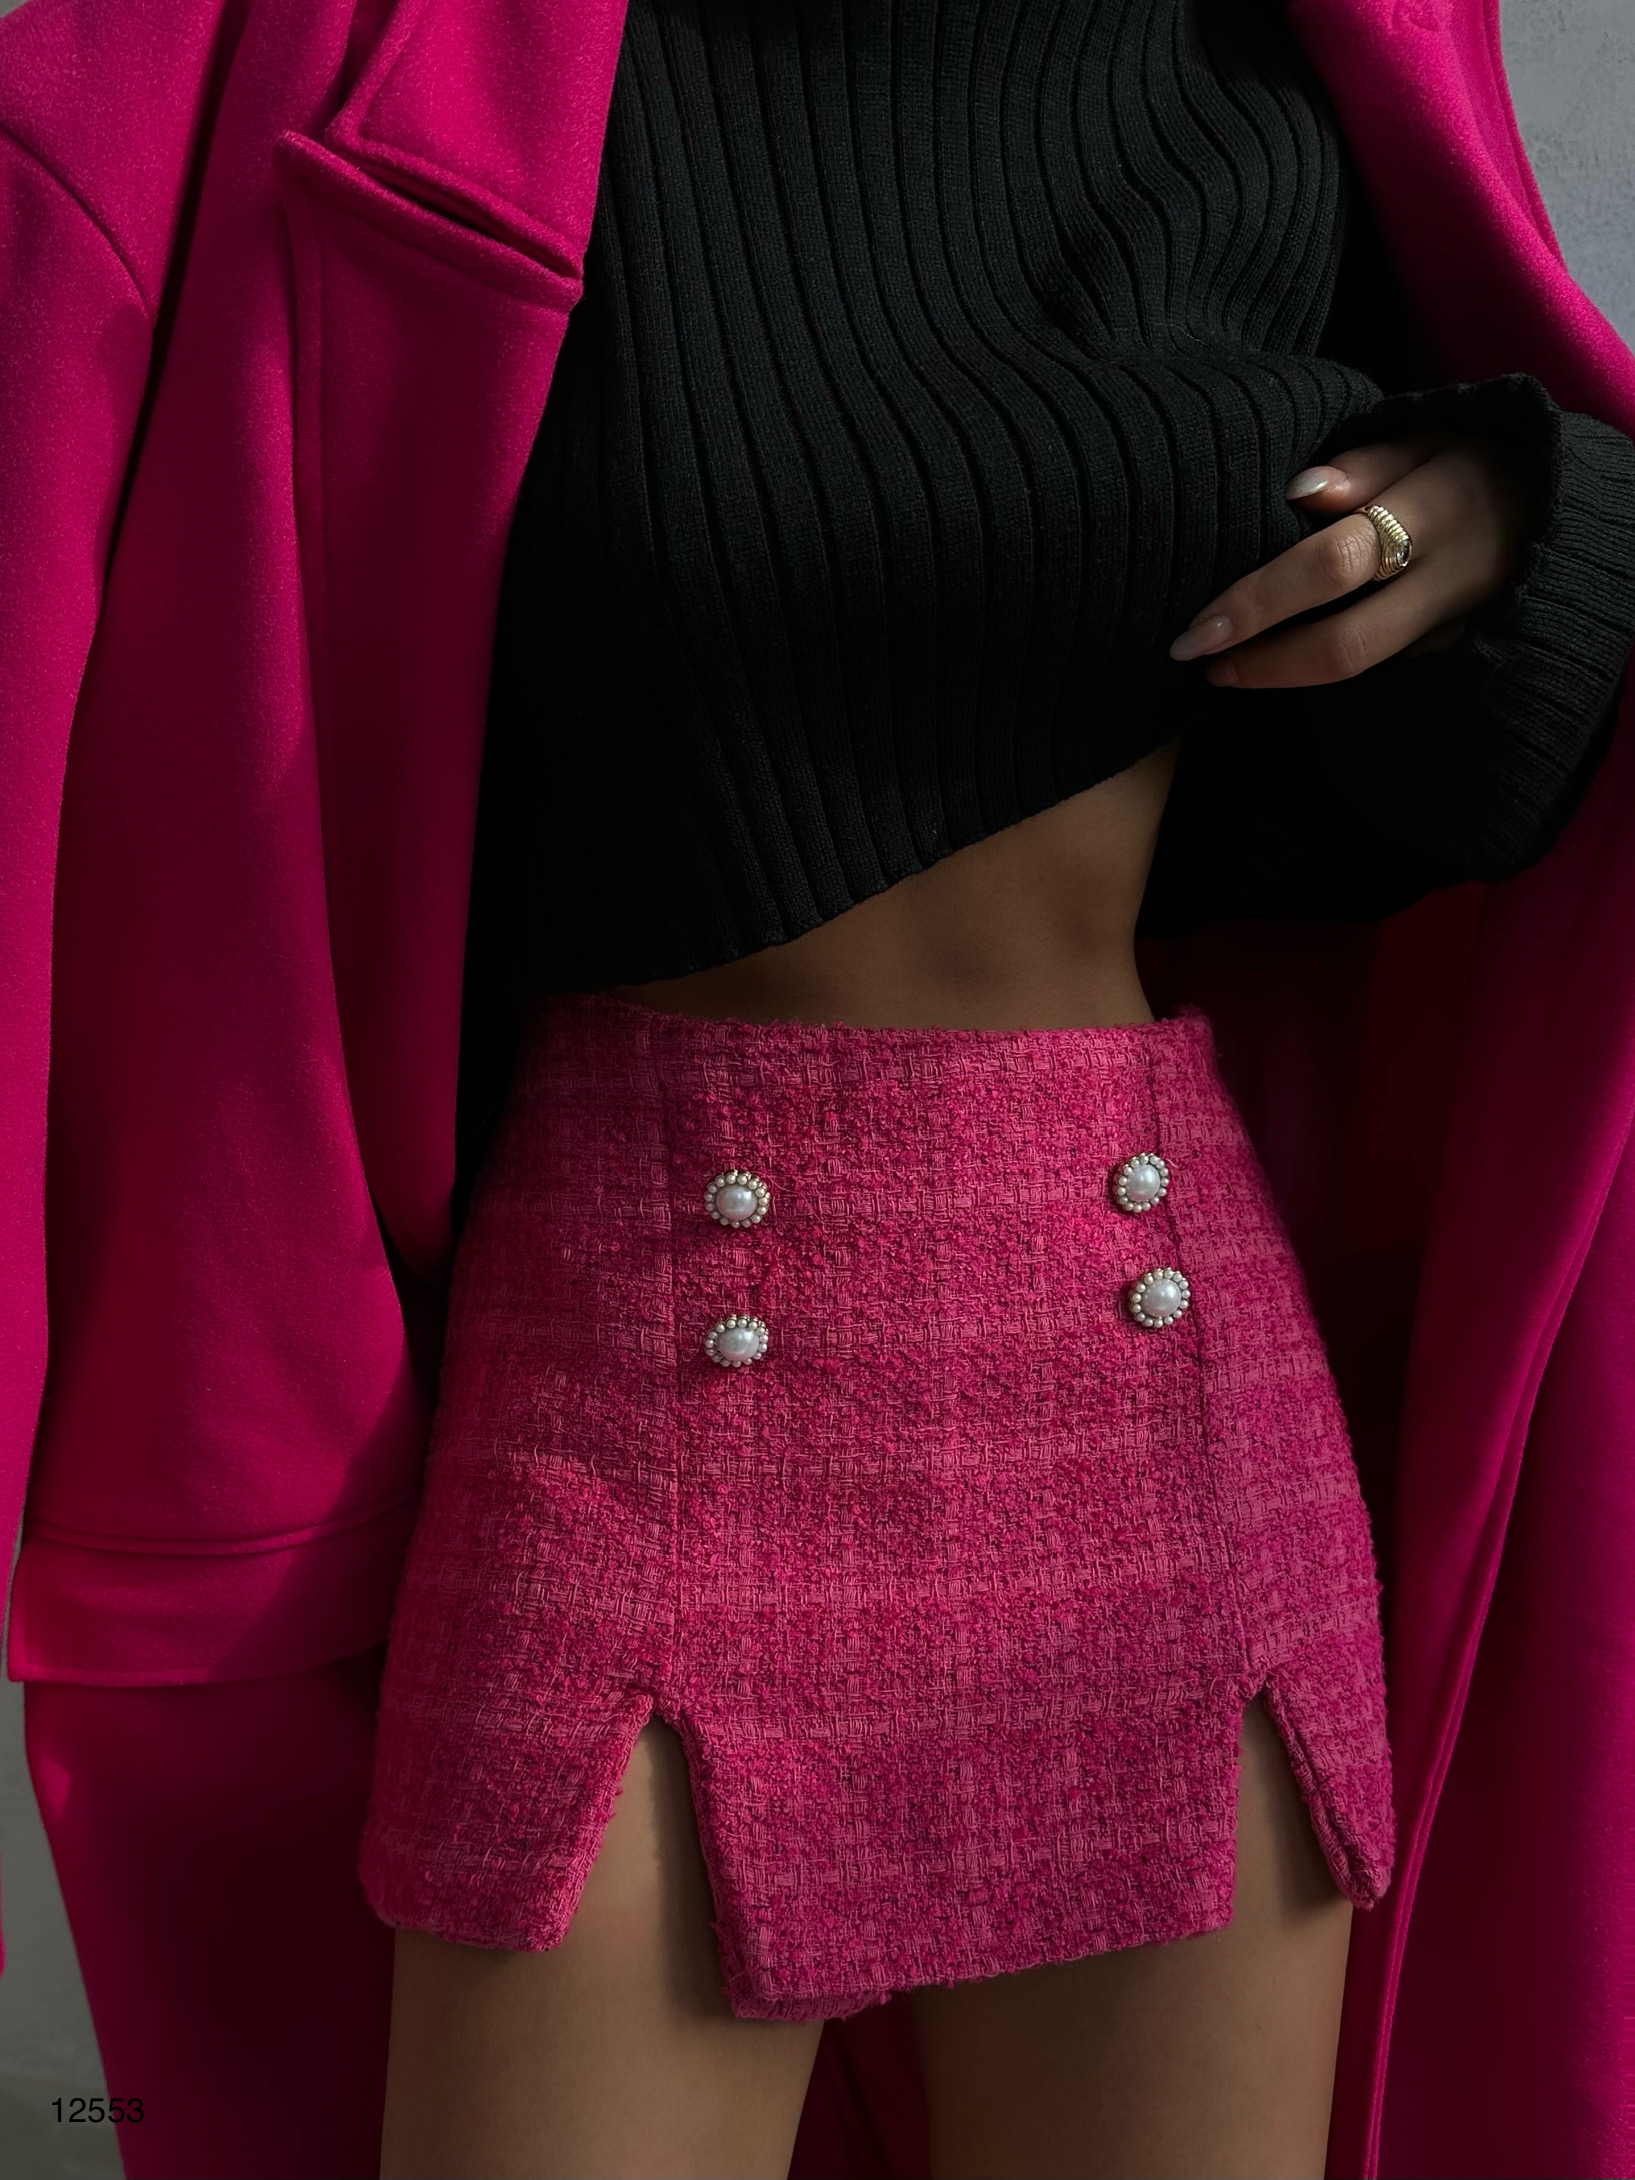 A model wears 37836 - Short Skirt - Pink, wholesale Skirt of Black Fashion to display at Lonca